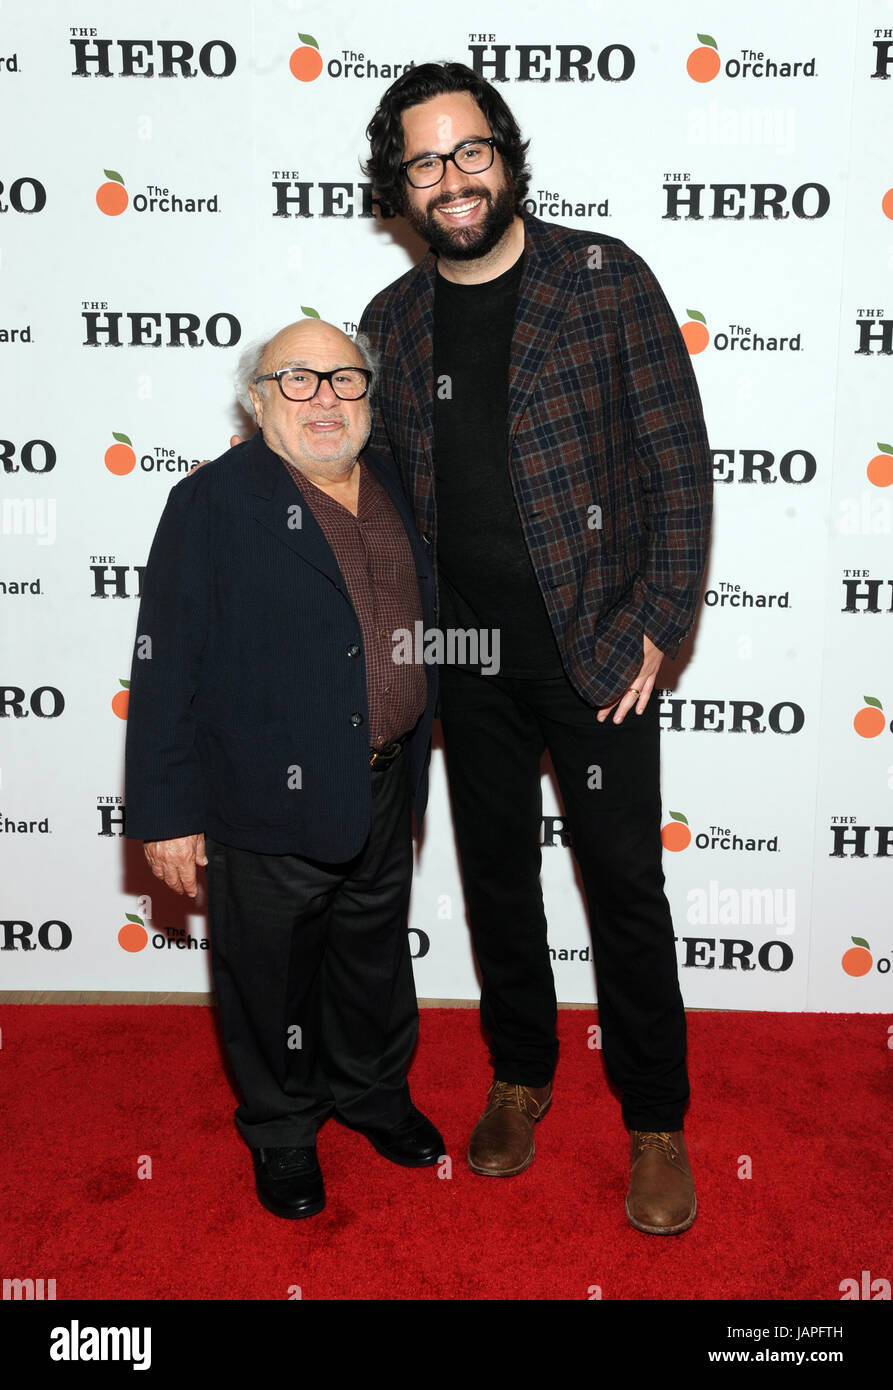 New York, NY, USA. 07th June, 2017. Danny DeVito and Brett Haley at 'The Hero' New York Premiere at the Whitby Hotel on June 7, 2017 in New York City. Credit: John Palmer/Media Punch/Alamy Live News Stock Photo